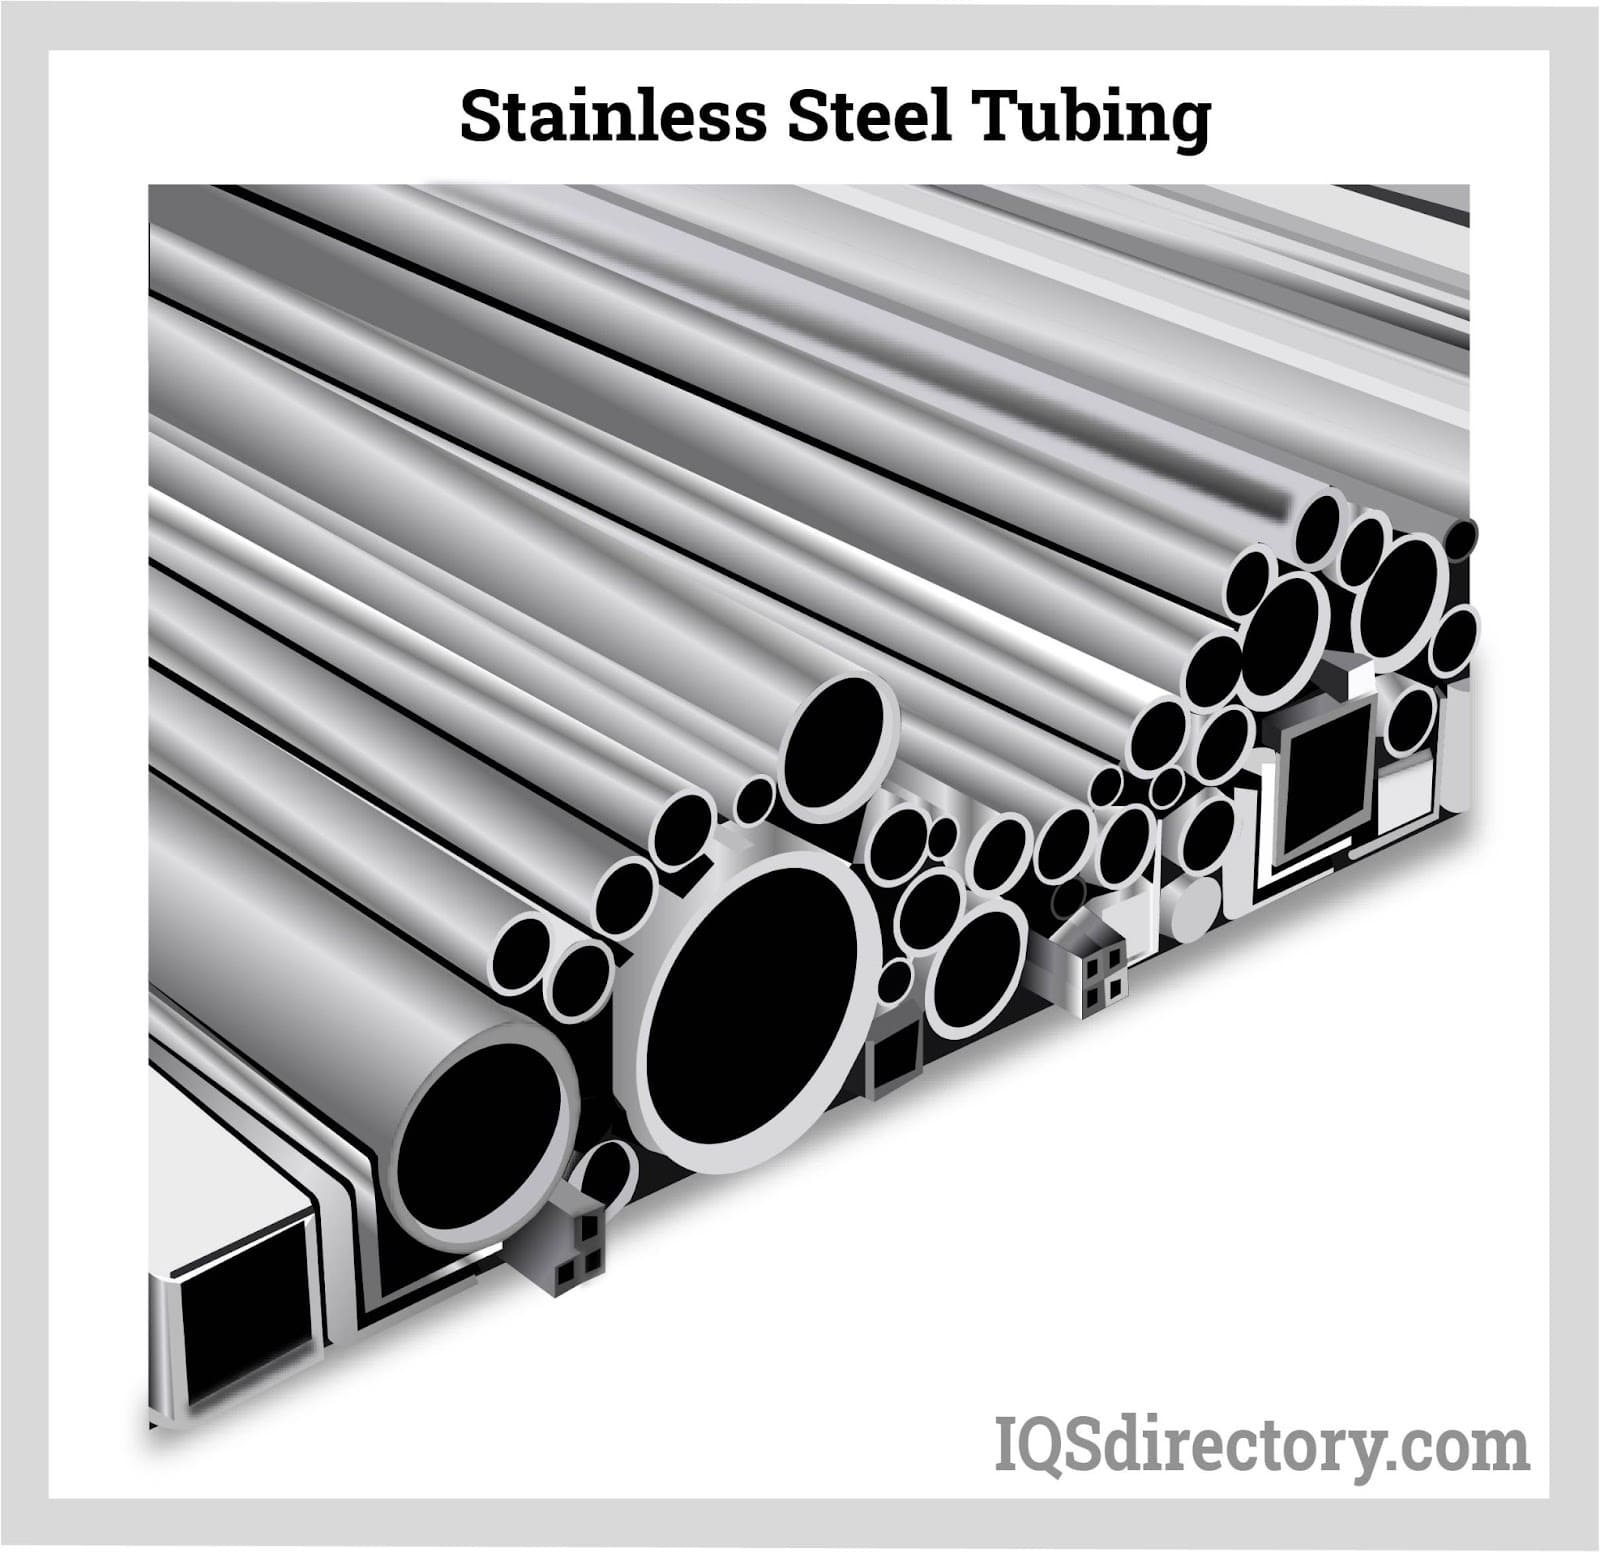 Stainless Steel Tubing: Types, Applications, Benefits, and Manufacturing